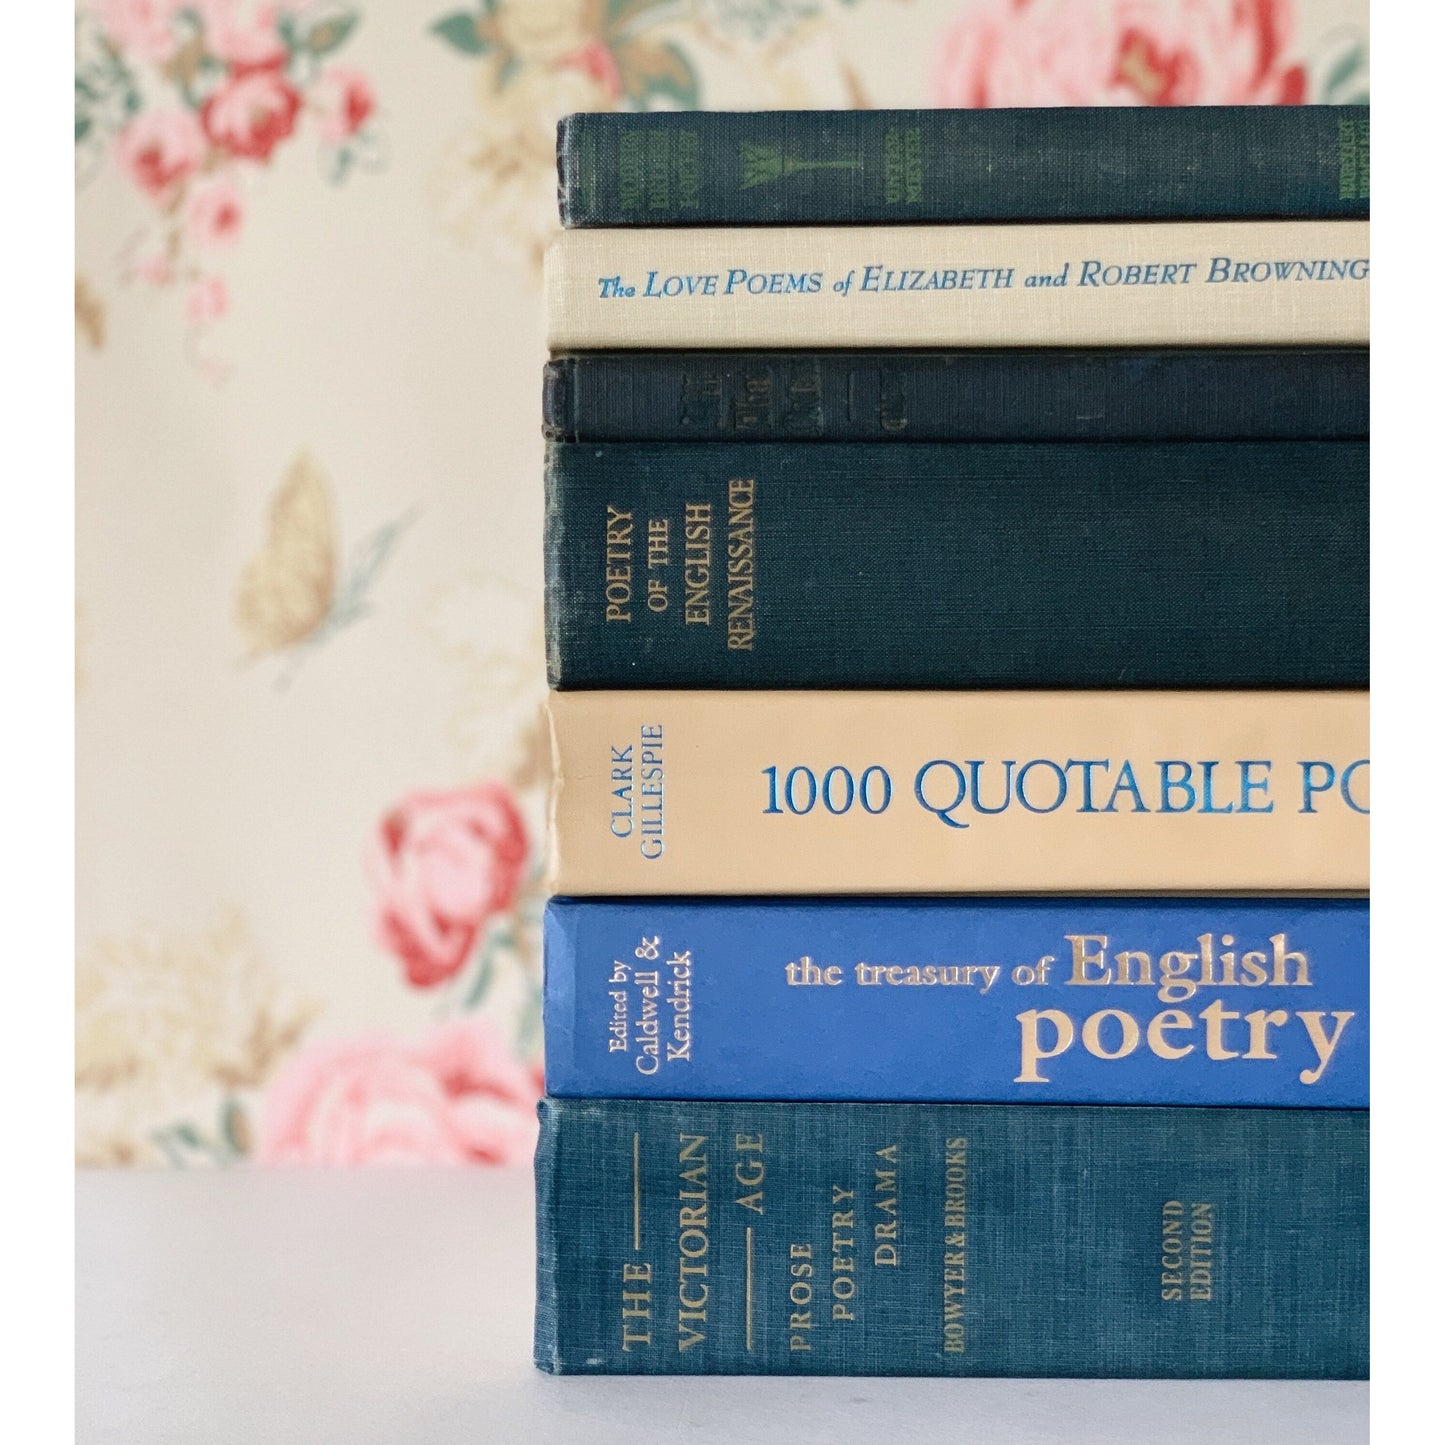 Blue Poetry and Literature Books for Decor, Large Antique and Vintage Book Bundle